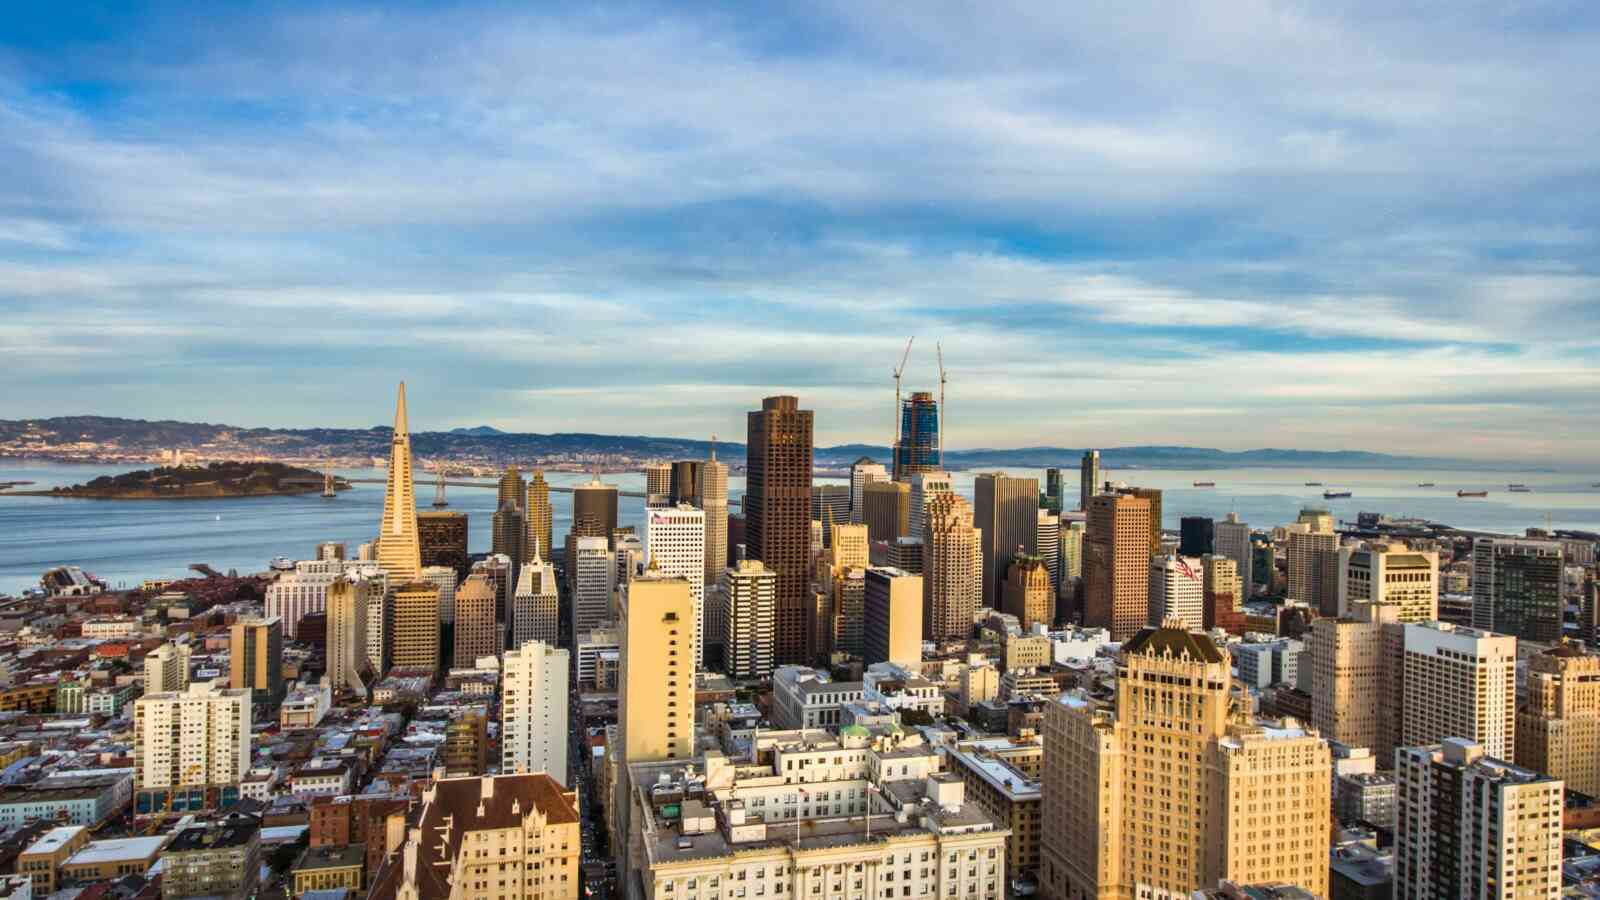 A skyline of the city of San Francisco on a sunny day with blue skies and some clouds. There are tall buildings in the center of the image and water from the bay can be seen in the distance.